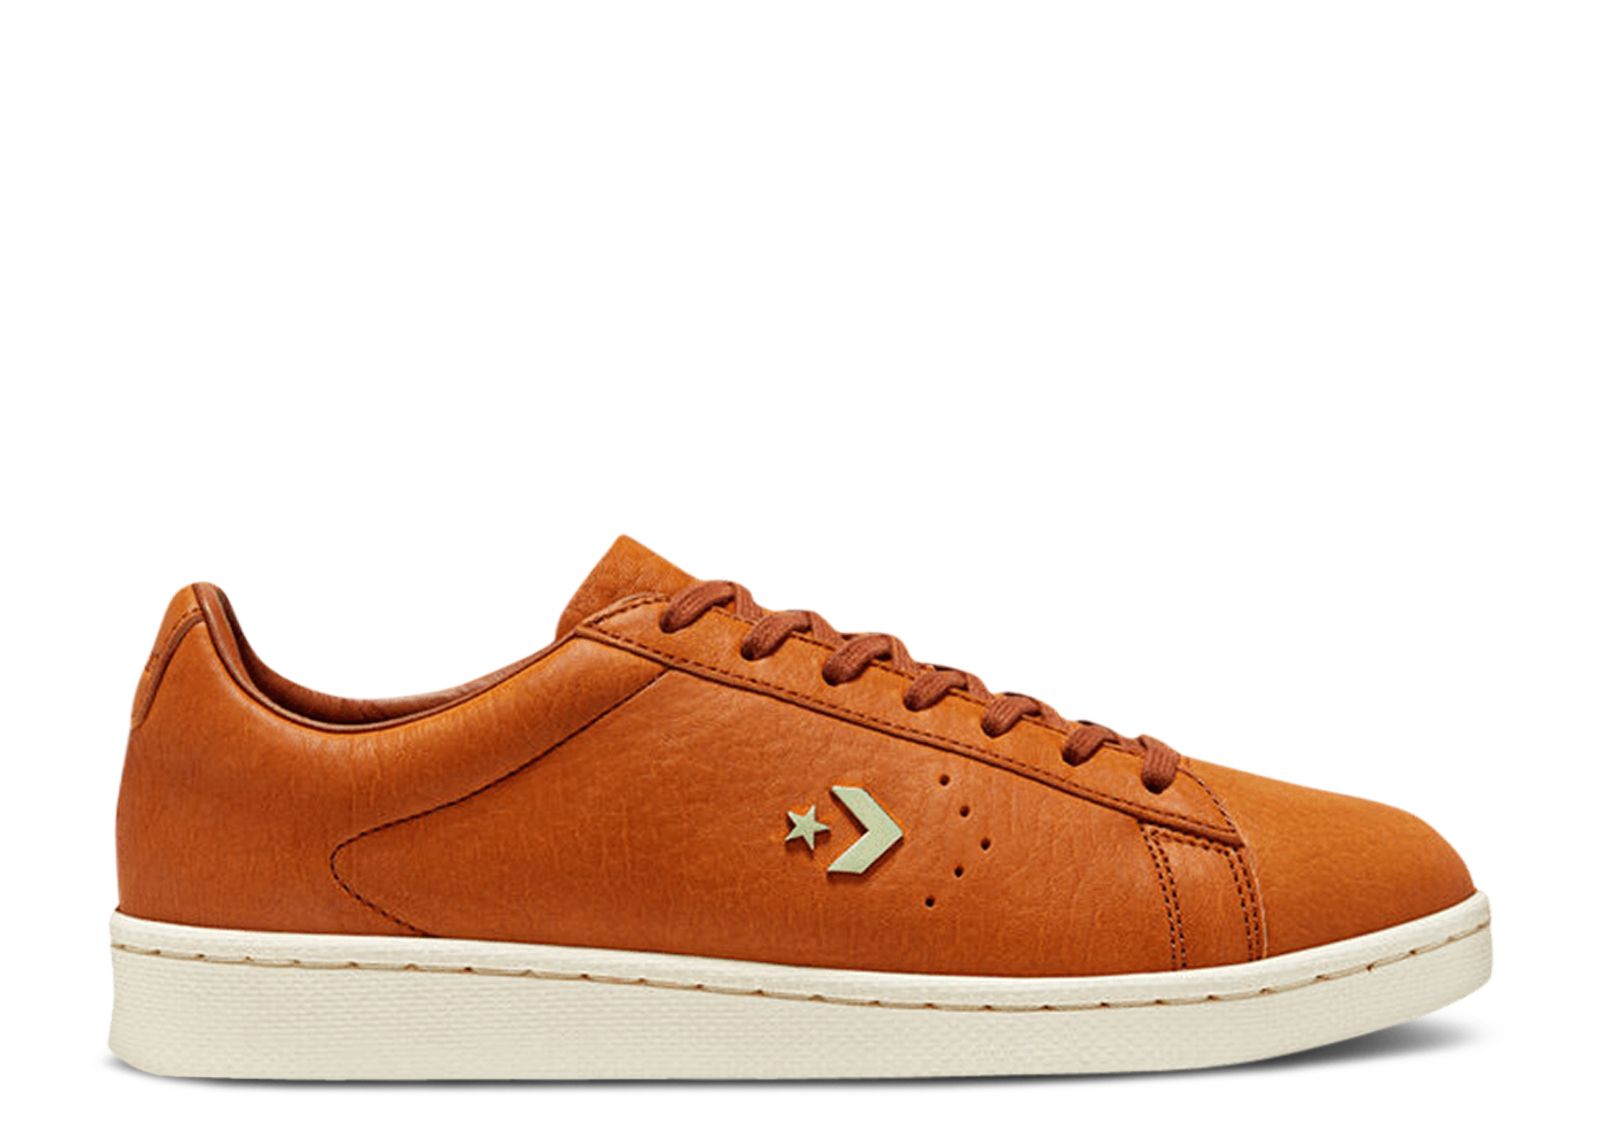 Кроссовки Converse Horween Leather Co. X Pro Leather Low 'Potters Clay', коричневый